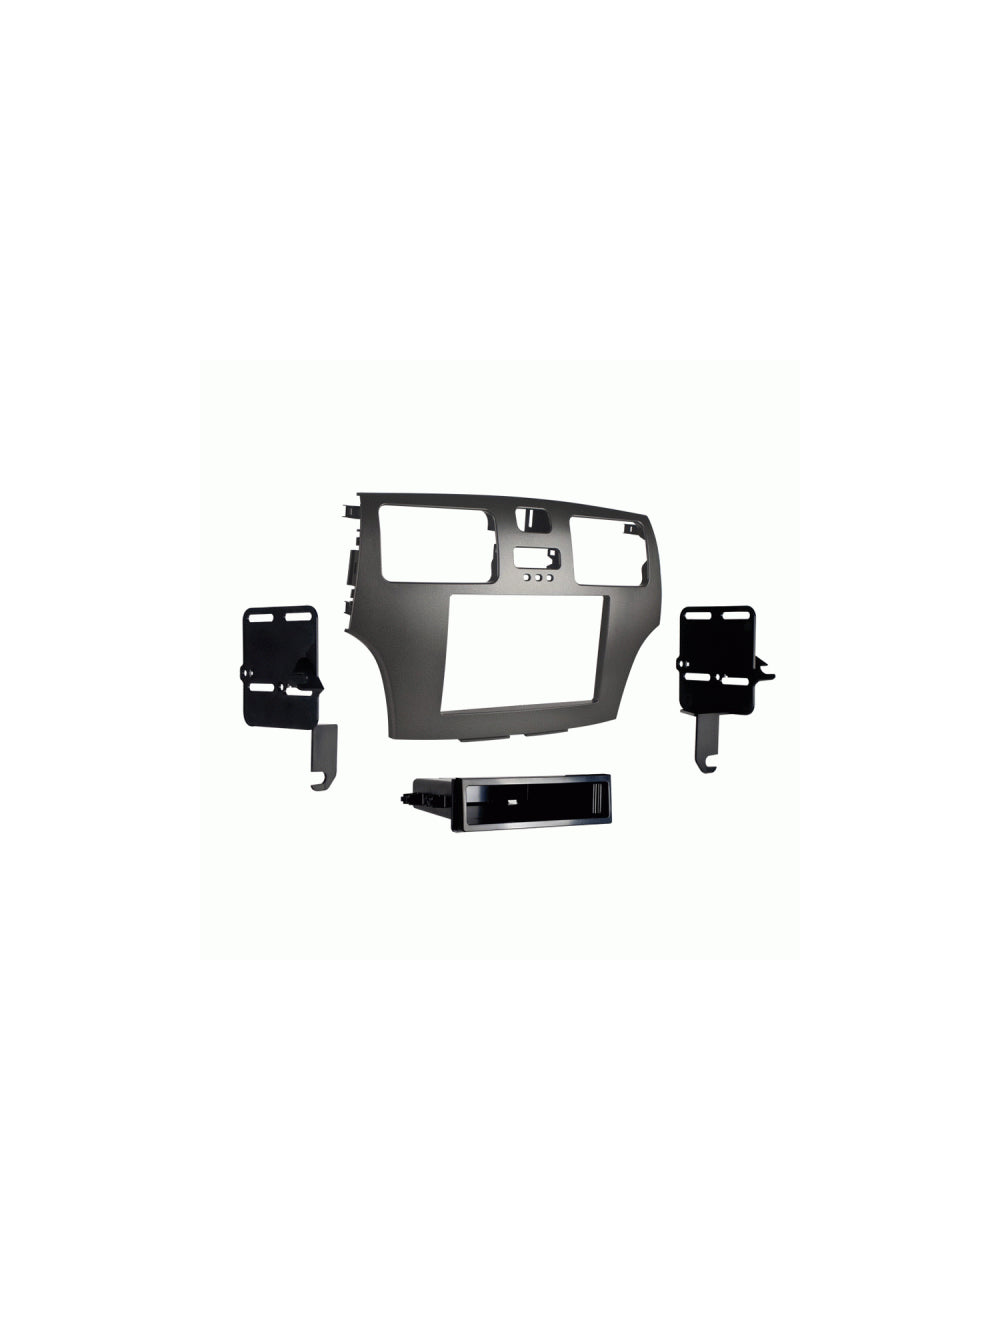 Metra 99-8158G Single or Double DIN Installation Kit for 2002-2006 Lexus ES300 and ES330